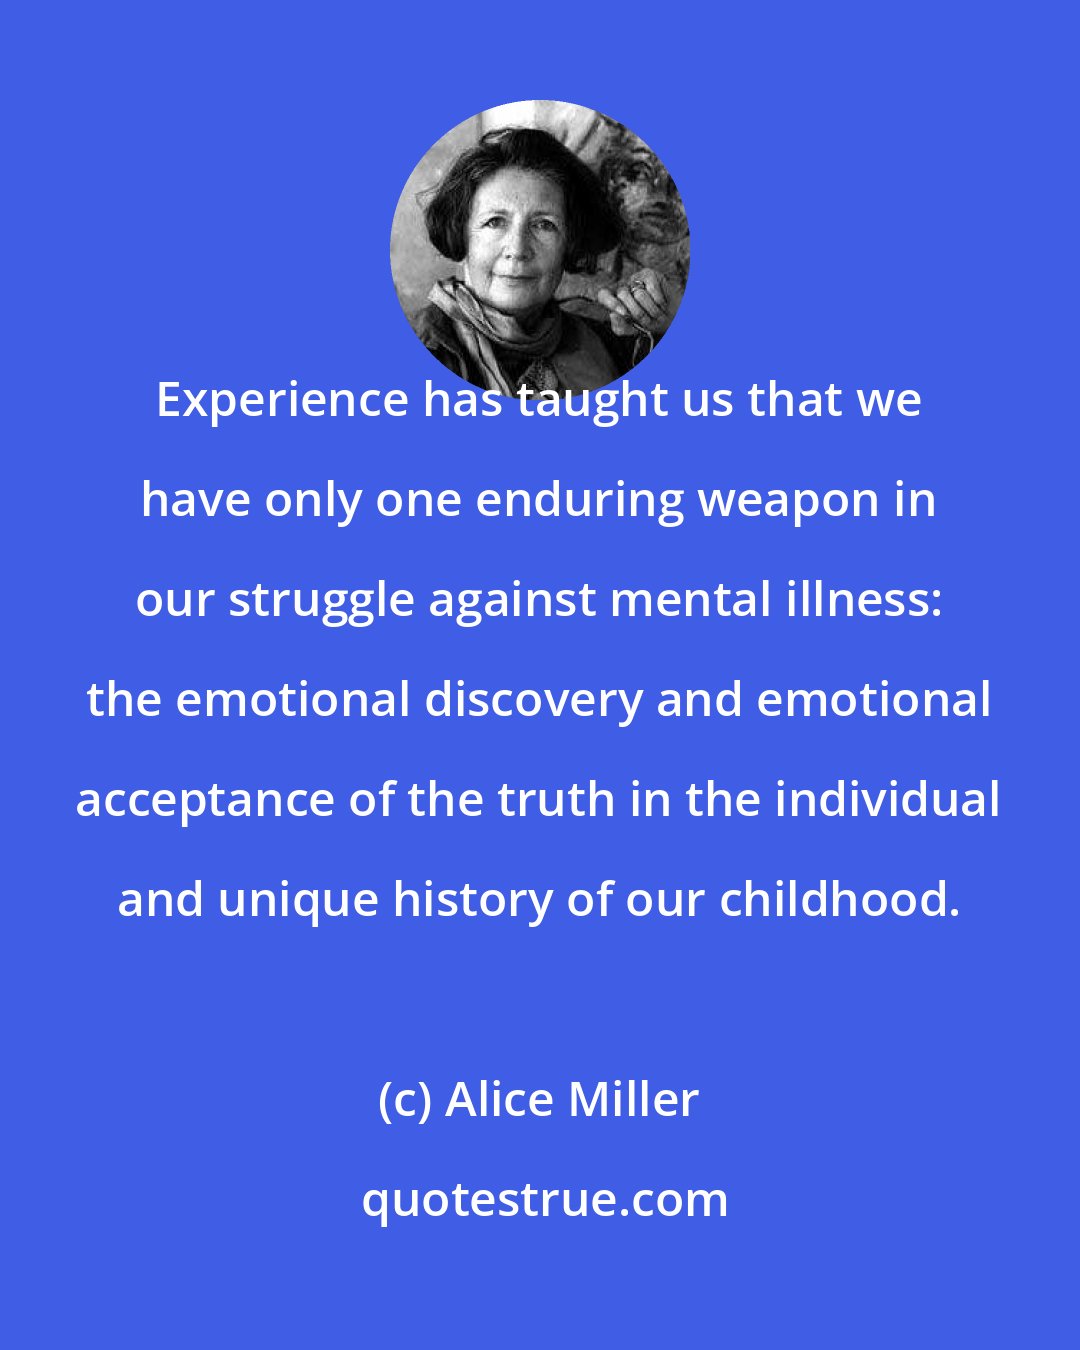 Alice Miller: Experience has taught us that we have only one enduring weapon in our struggle against mental illness: the emotional discovery and emotional acceptance of the truth in the individual and unique history of our childhood.